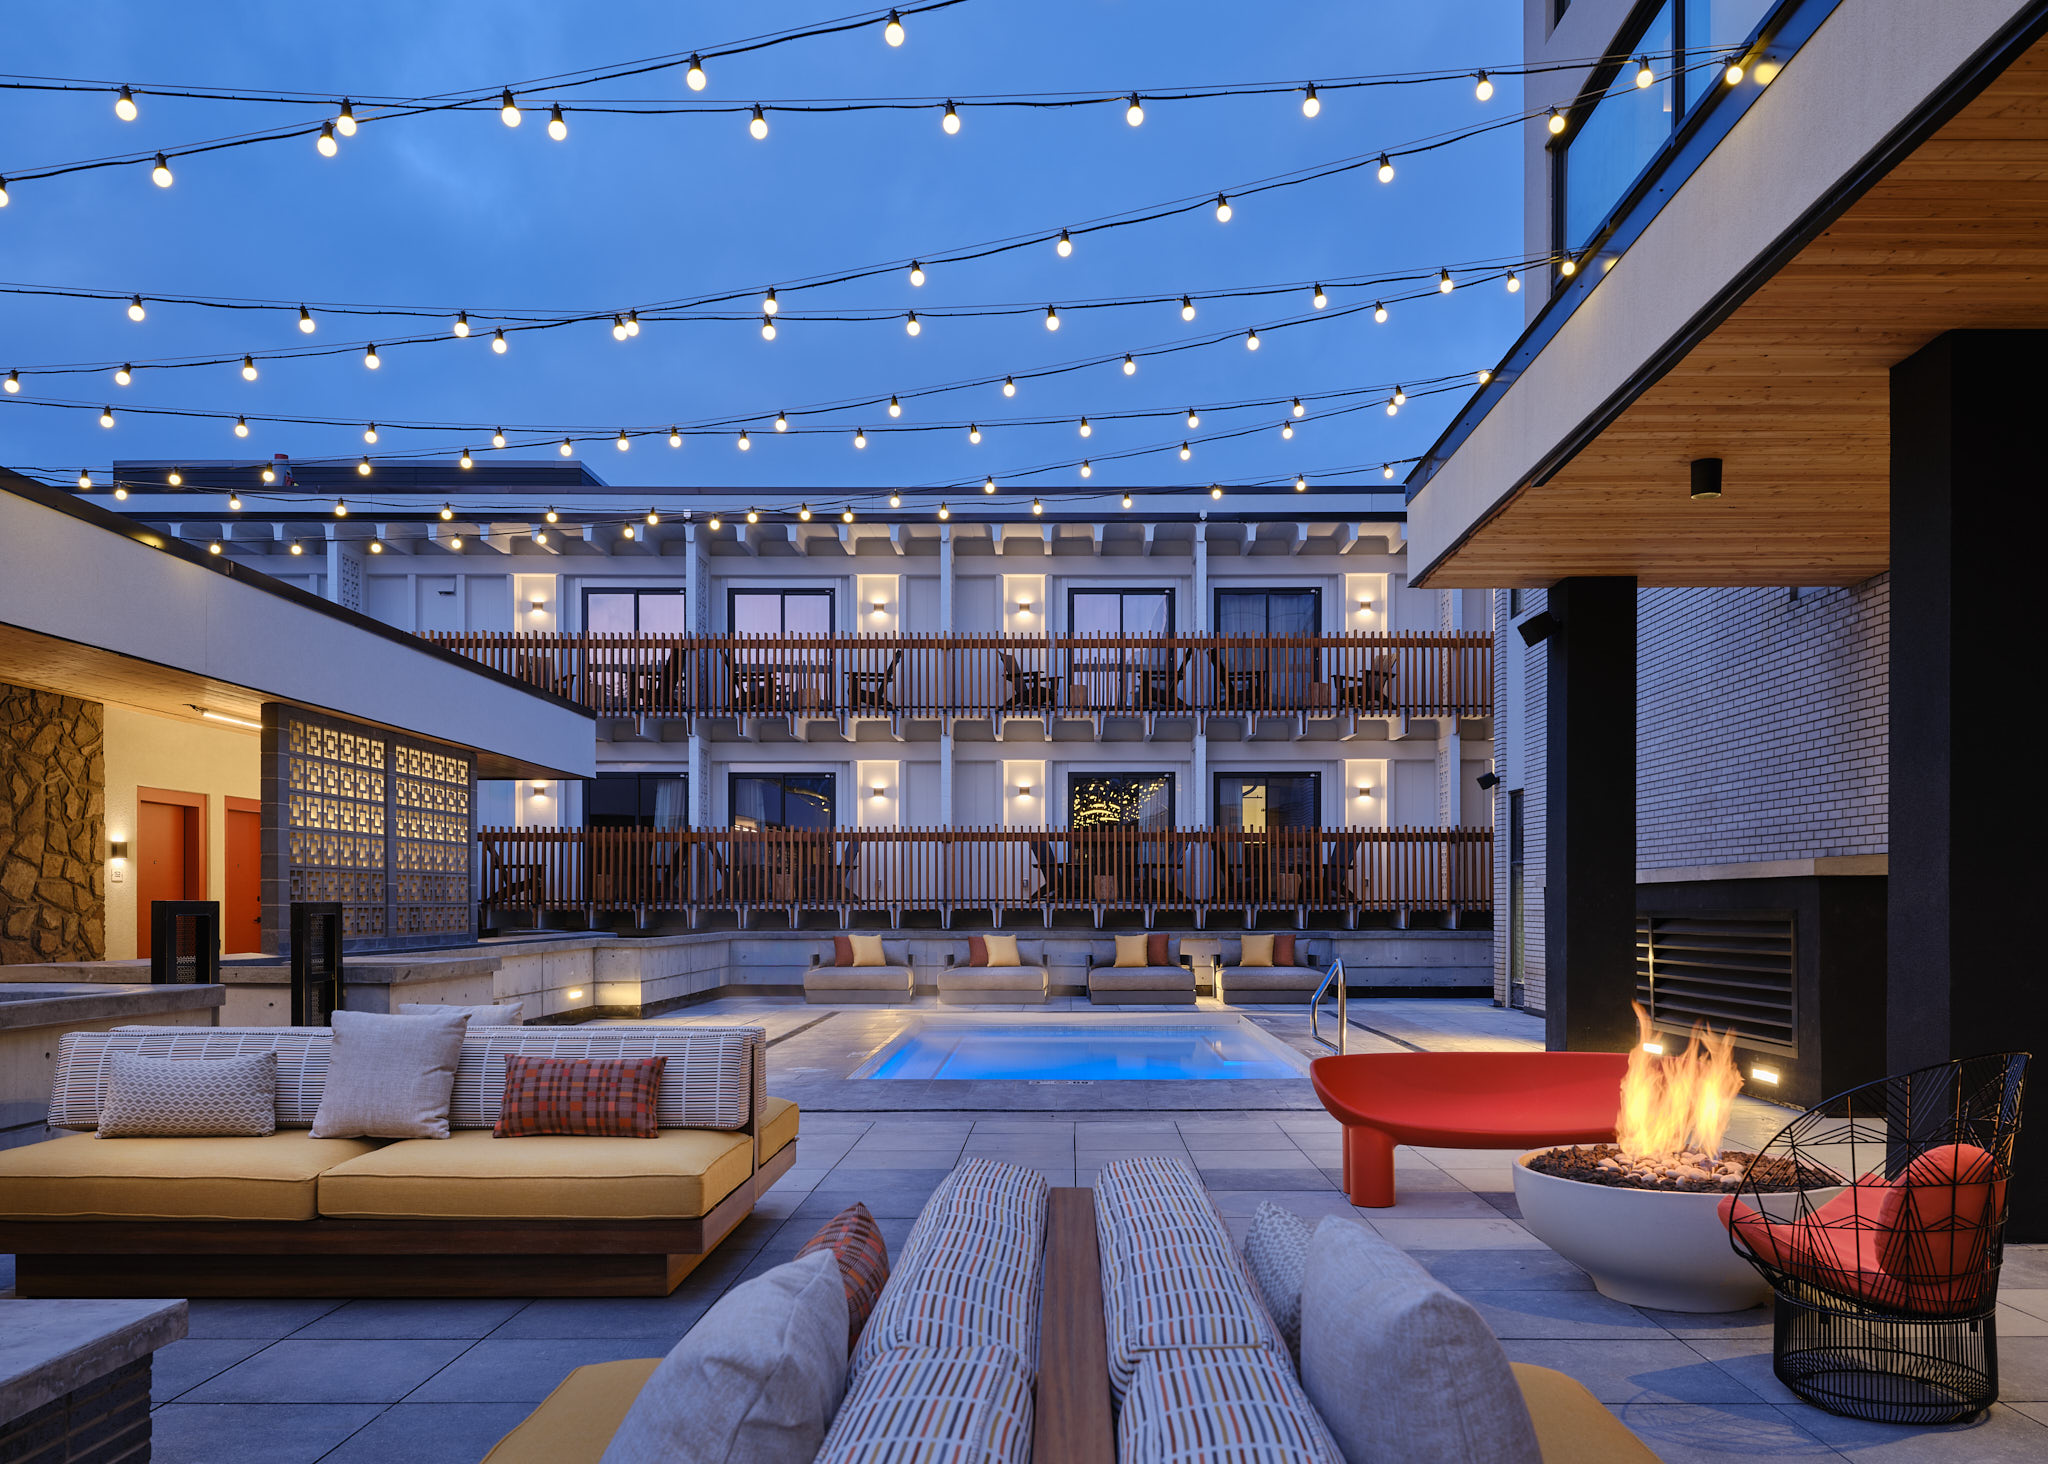 Guests can enjoy a year-round outdoor fireplace, heated patio stones and one of two hot tubs on Moxy Banff’s courtyard.